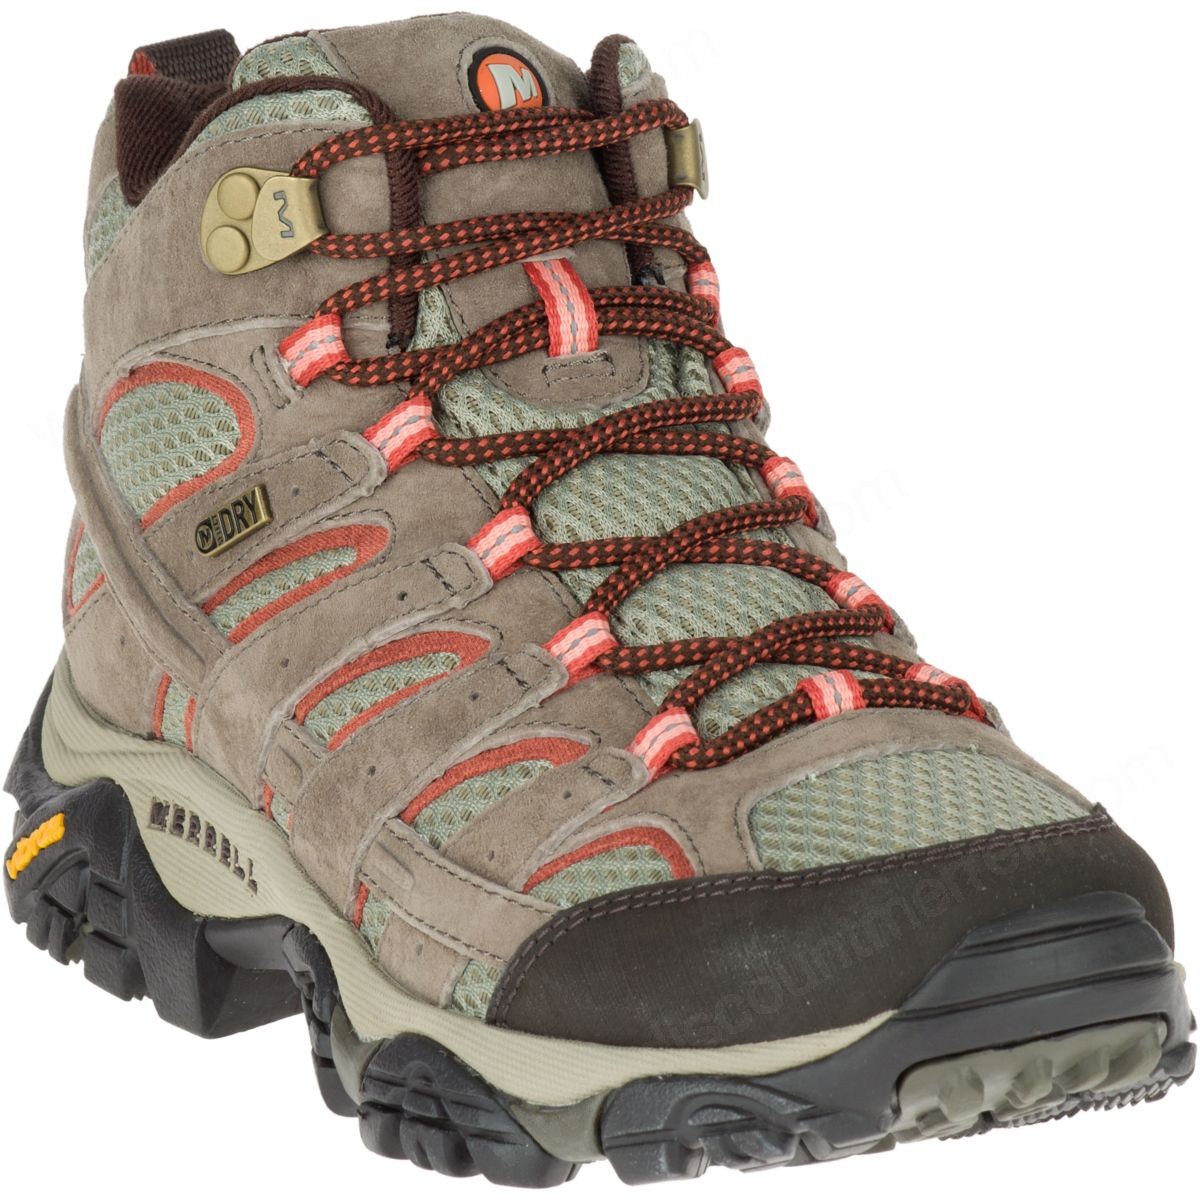 Merrell Lady's Moab Mother Of All Boots™ Mid Waterproof Wide Width Bungee Cord - -3